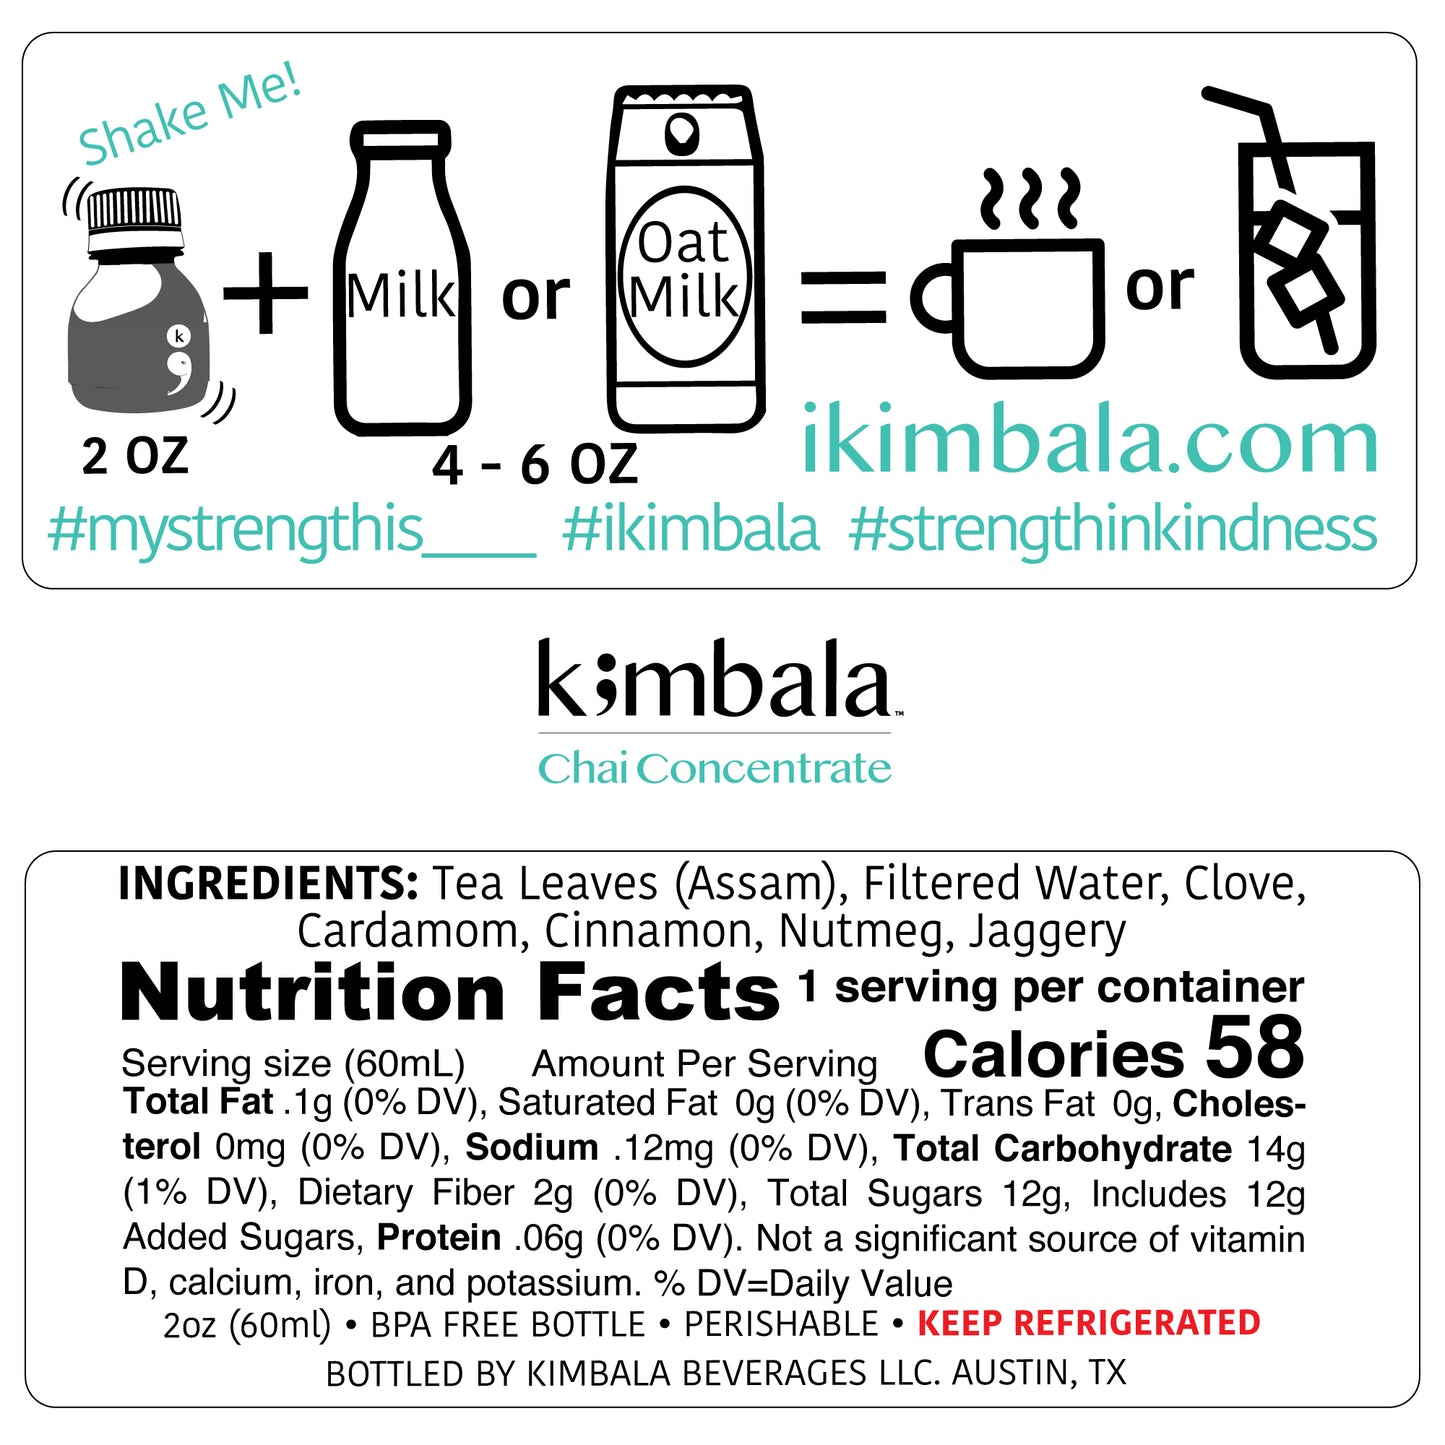 Kimbala Chai Concentrate nutrition facts for 2oz bottle and explanation in graphics on how to use the concentrate. Mix one 2oz bottle with 4-6oz of milk or oat milk and enjoy it hot or cold.